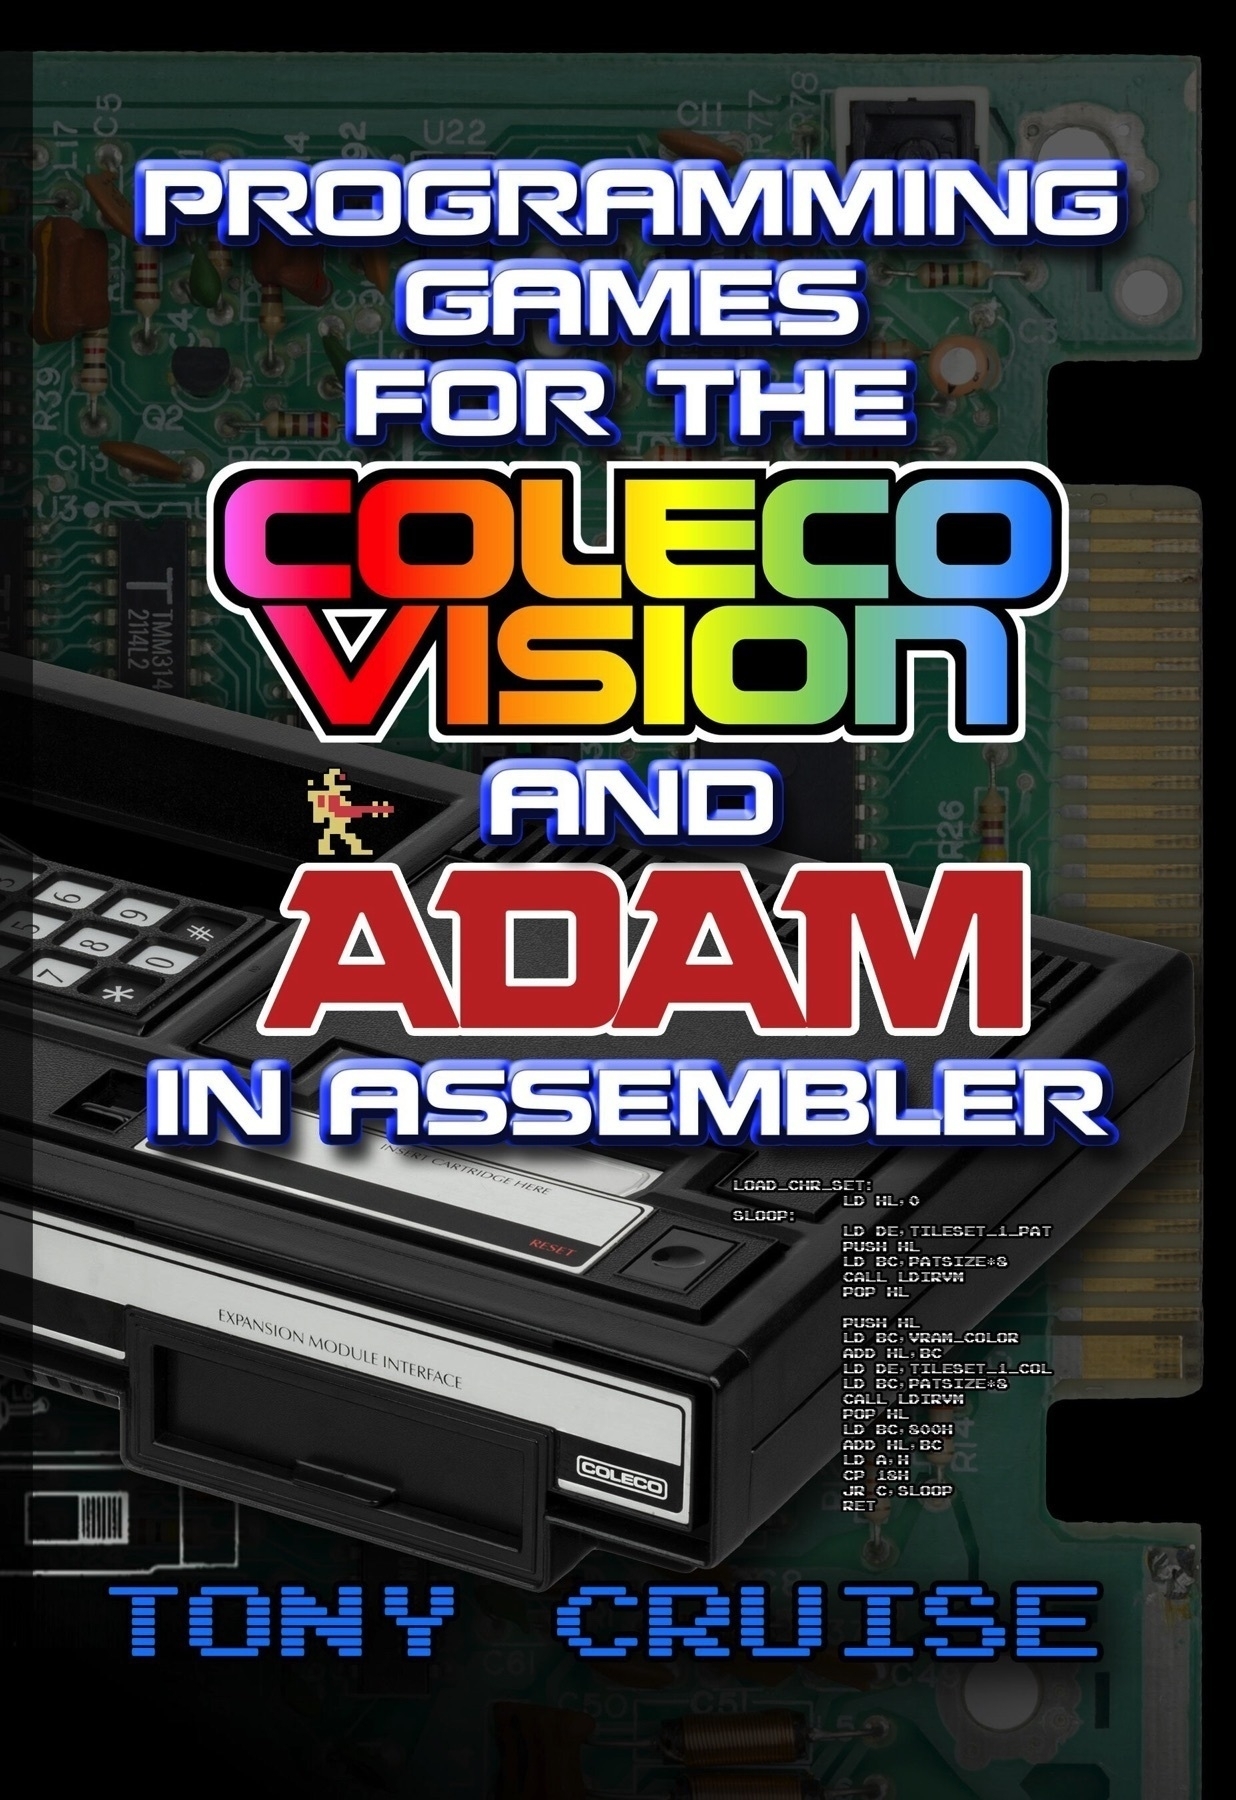 Cover for Programming Games For The ColecoVision and ADAM in Assembler book.